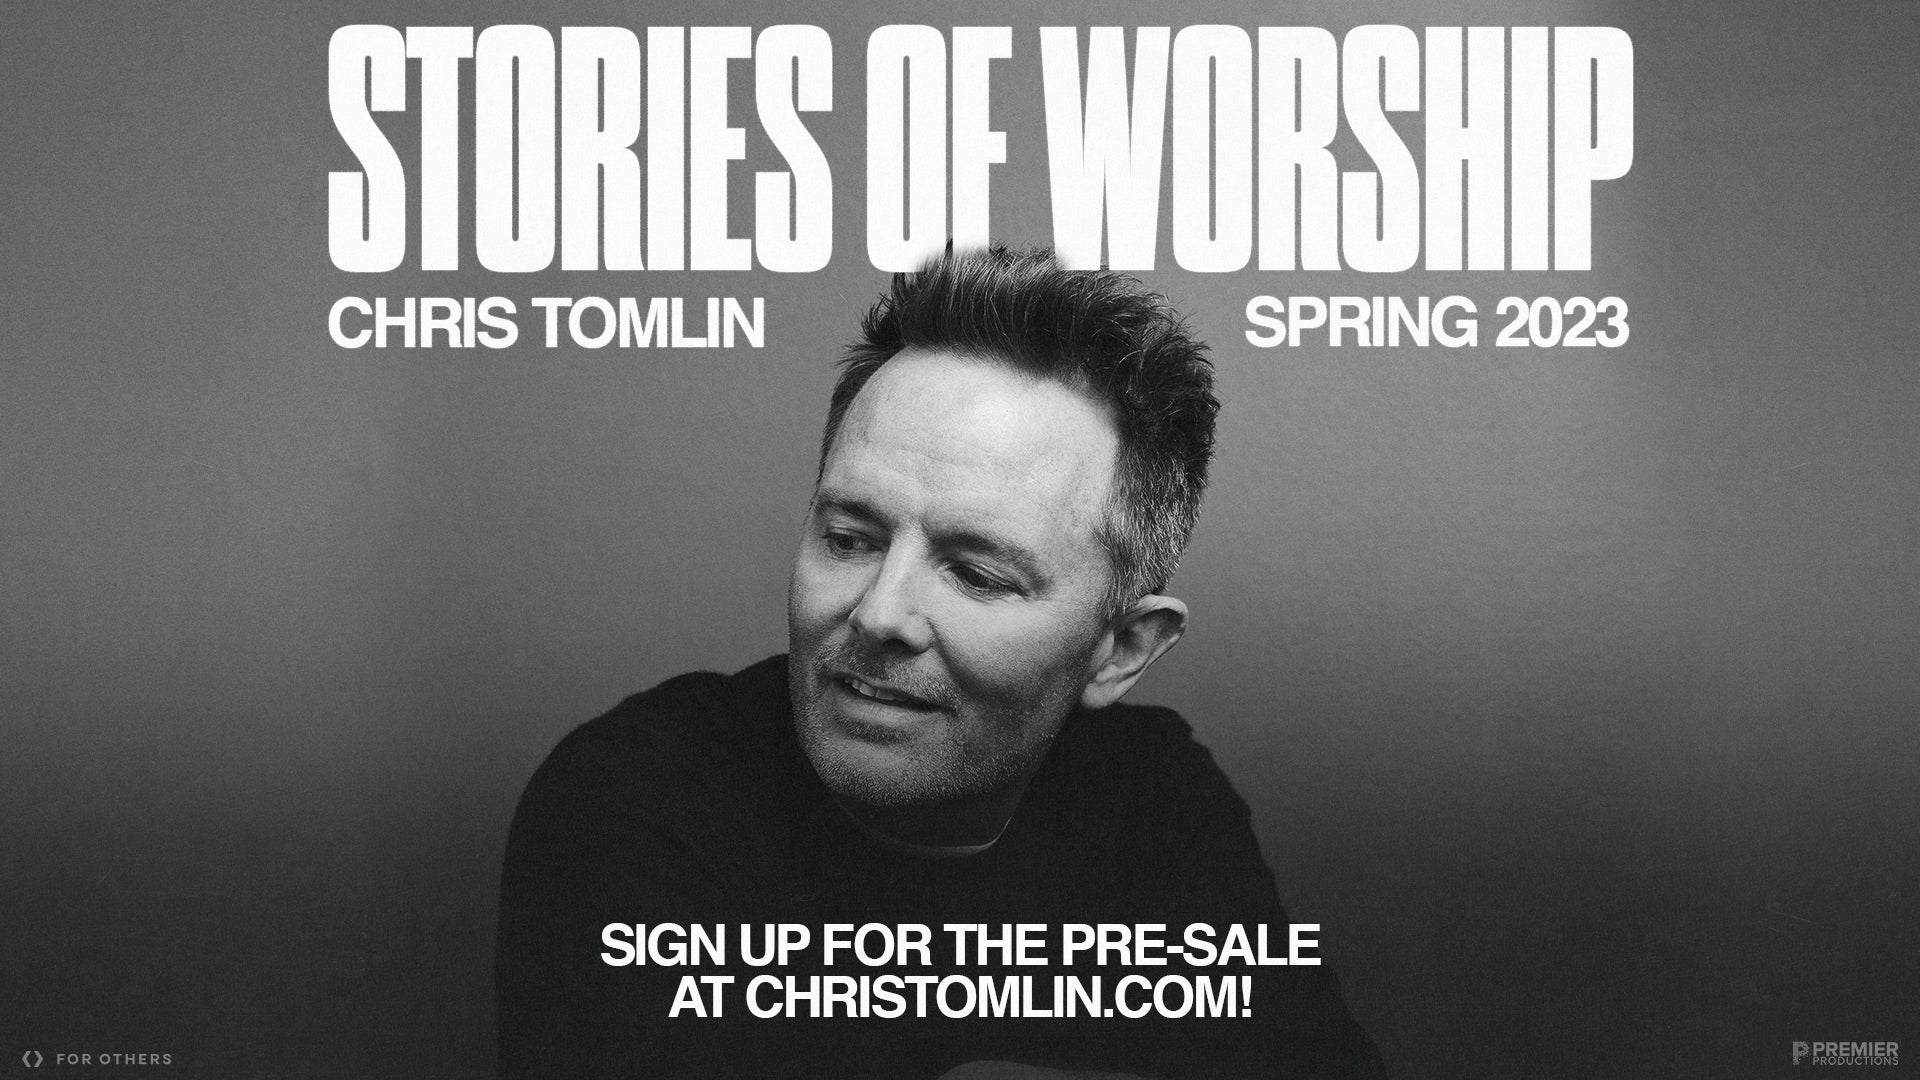 ‘Leader to Legend’ in Christian Music Chris Tomlin Announces 2023 Tour